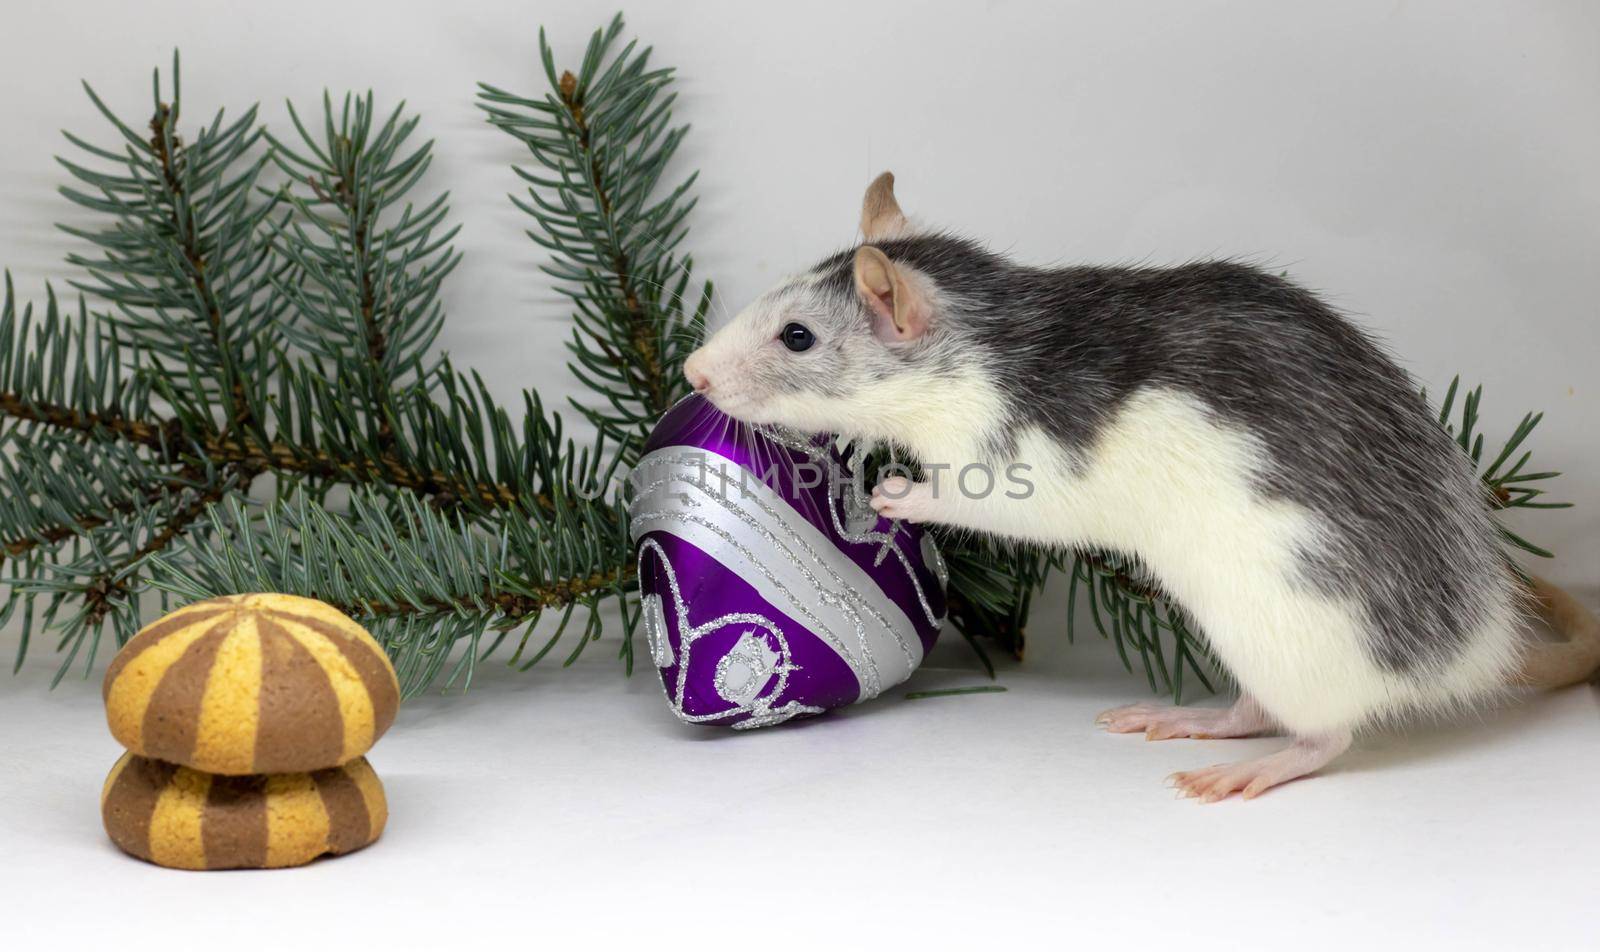 New Year concept. Cute white domestic rat in a New Year's decor. Symbol of the year 2020 is a rat. by lapushka62